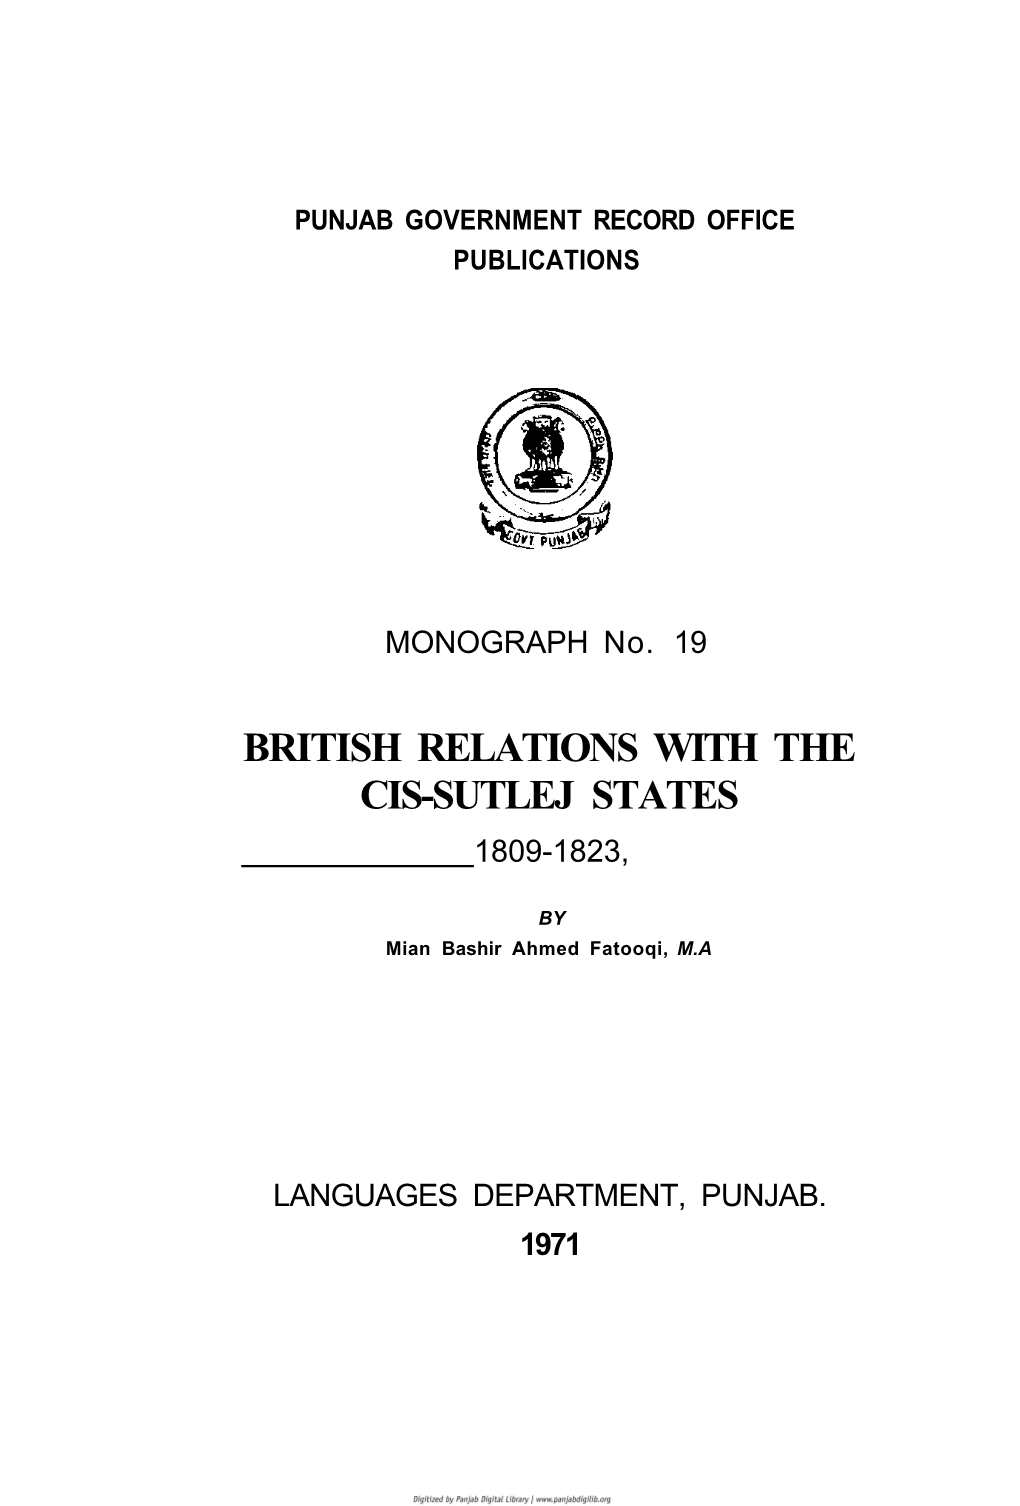 British Relations with the Cis-Sutlej States 1809-1823